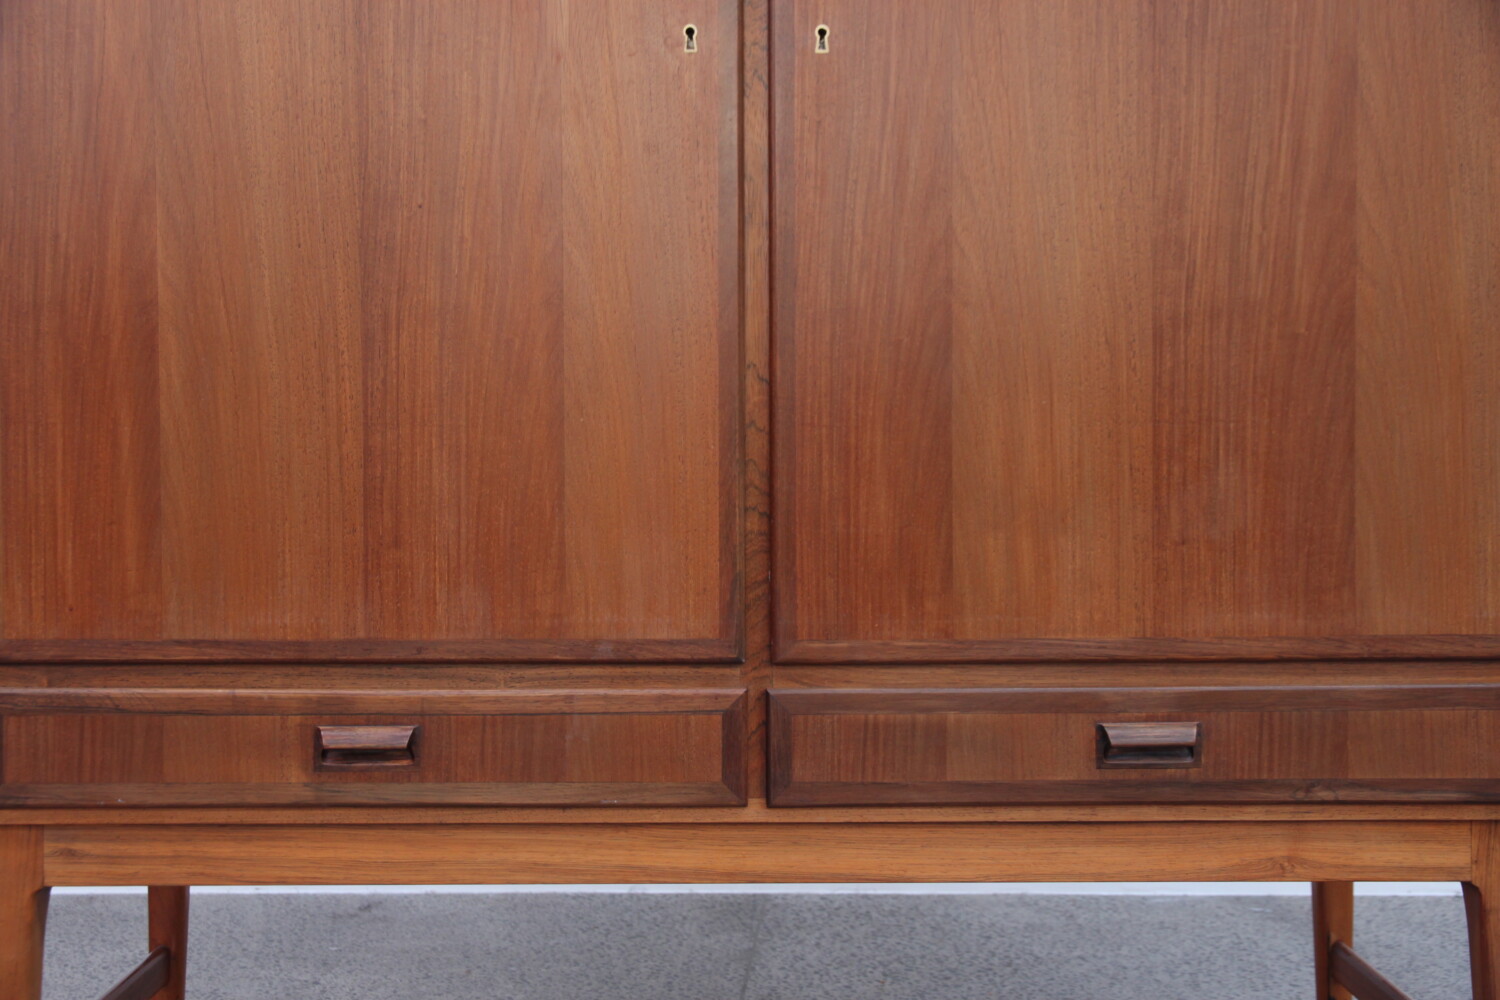 Cabinet by Niels Moller